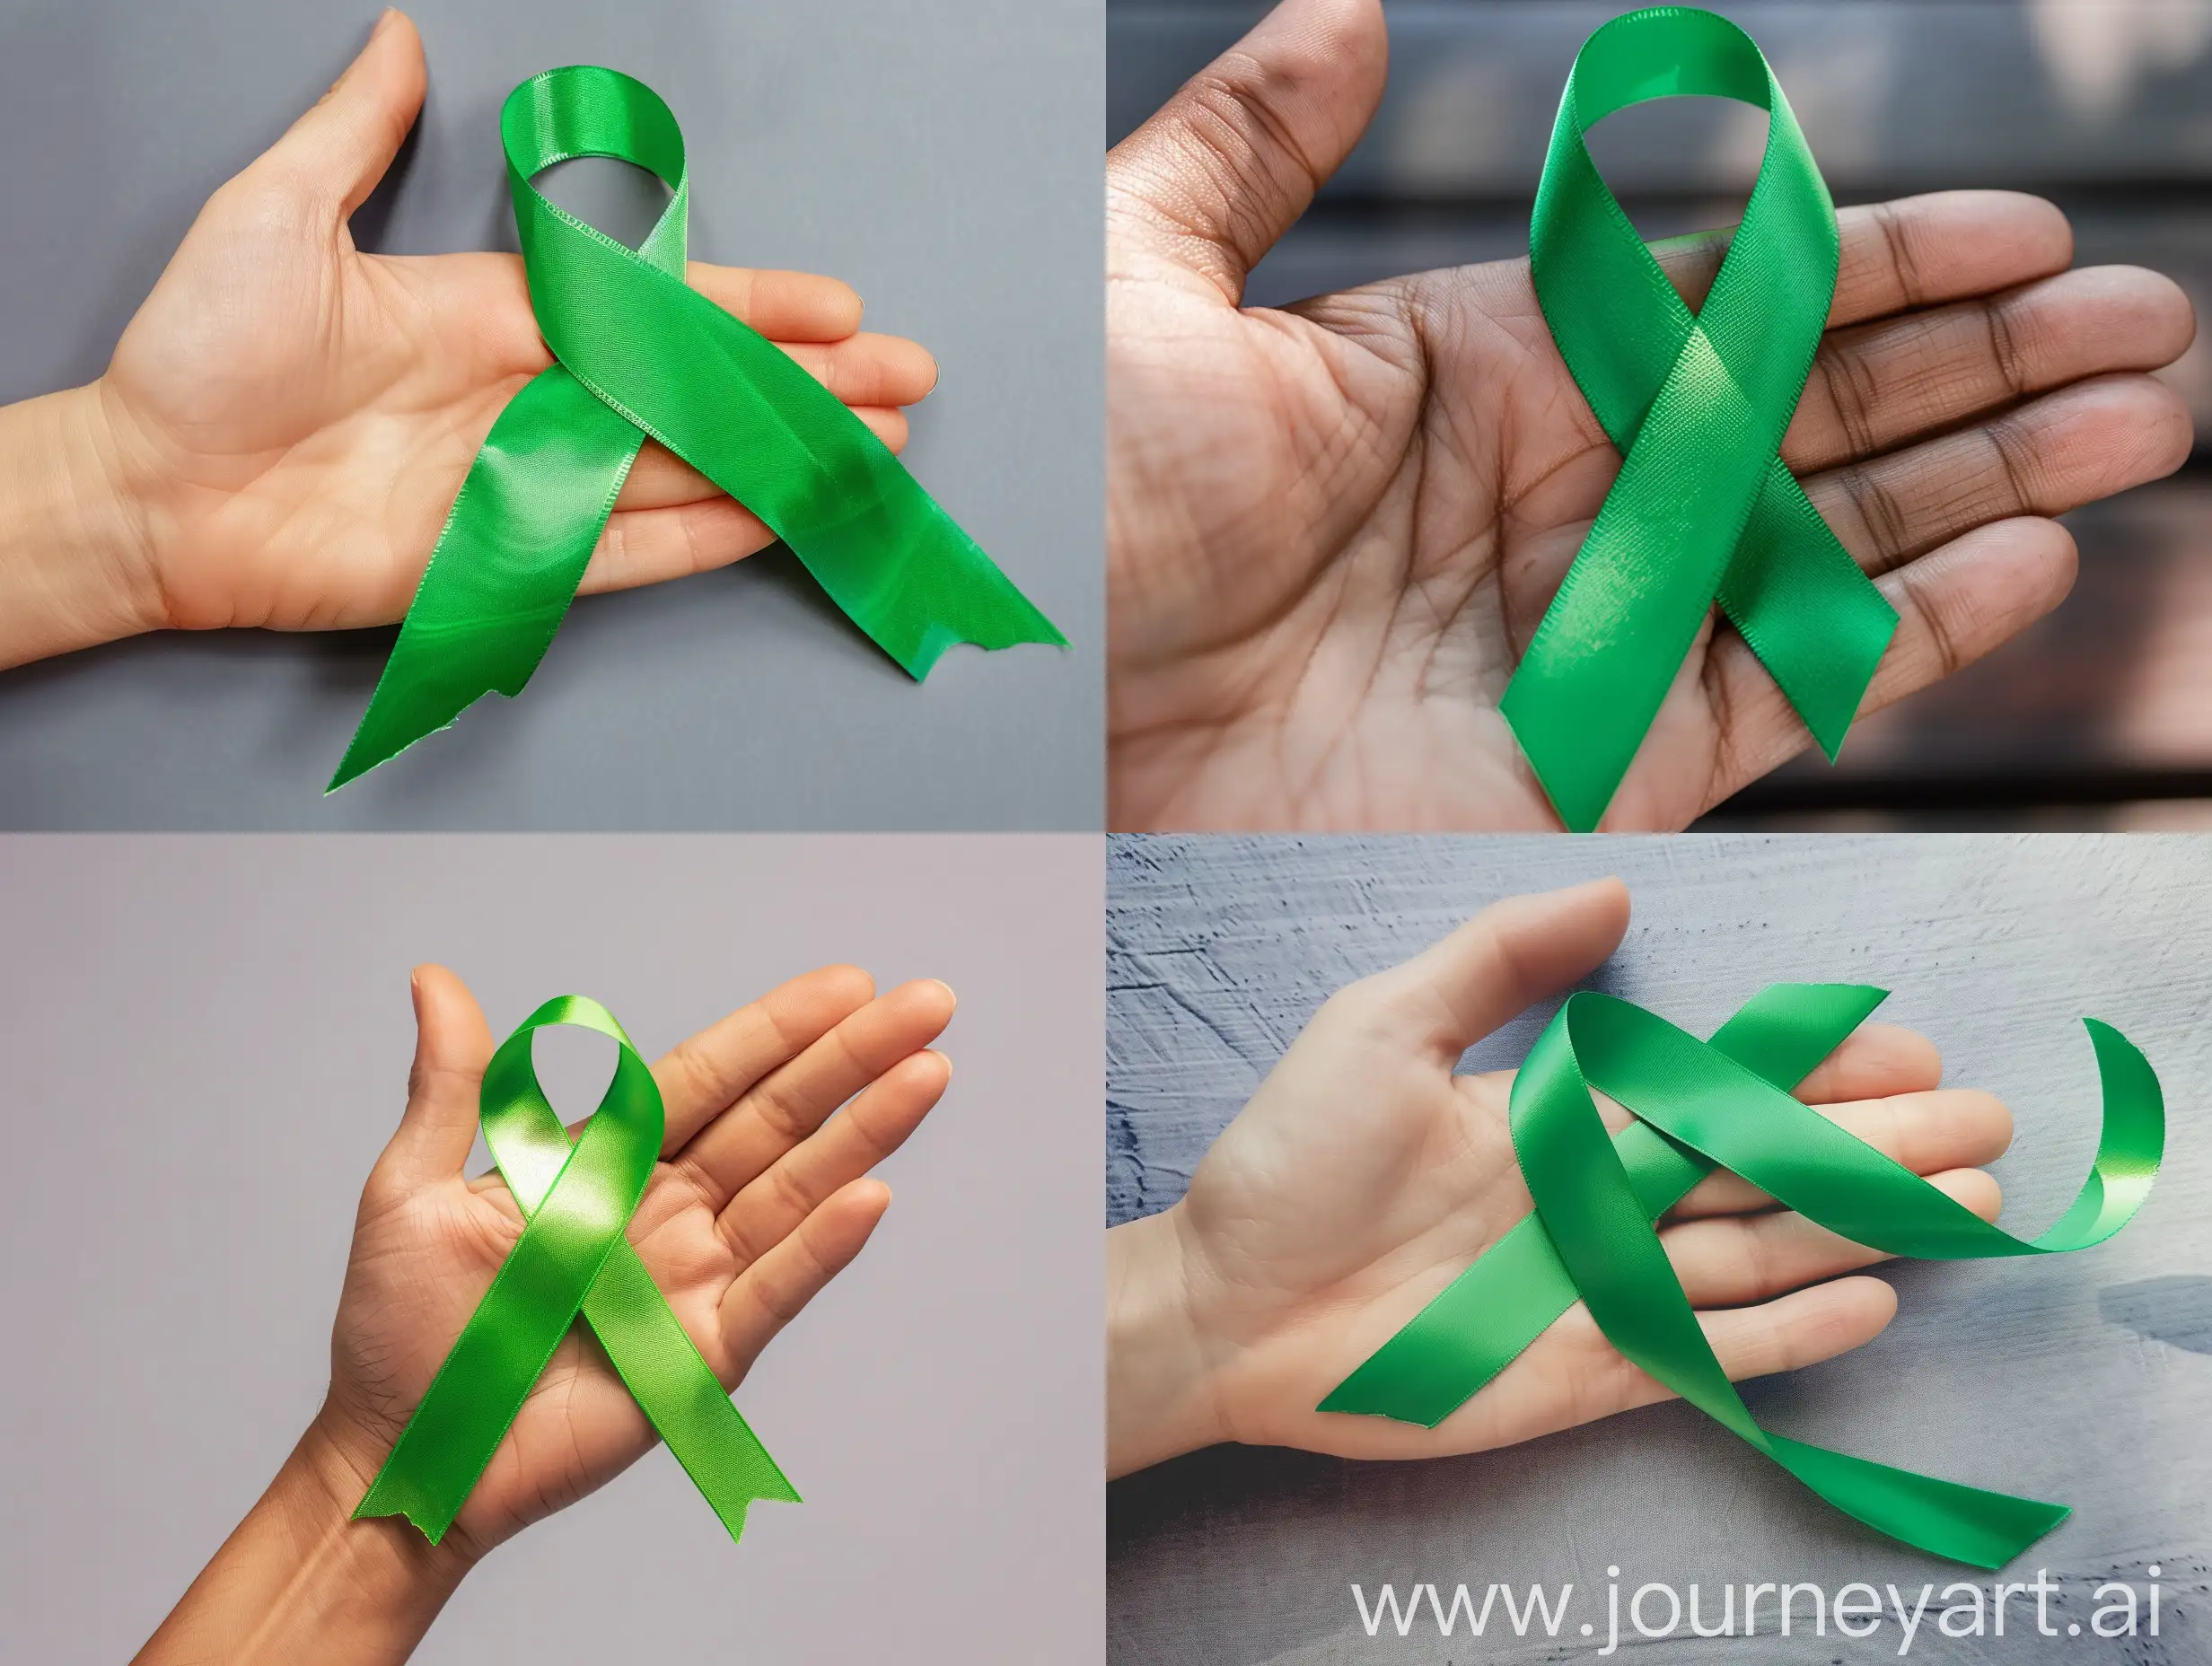 Supporting-Mental-Health-Holding-Green-Ribbon-on-World-Mental-Health-Day